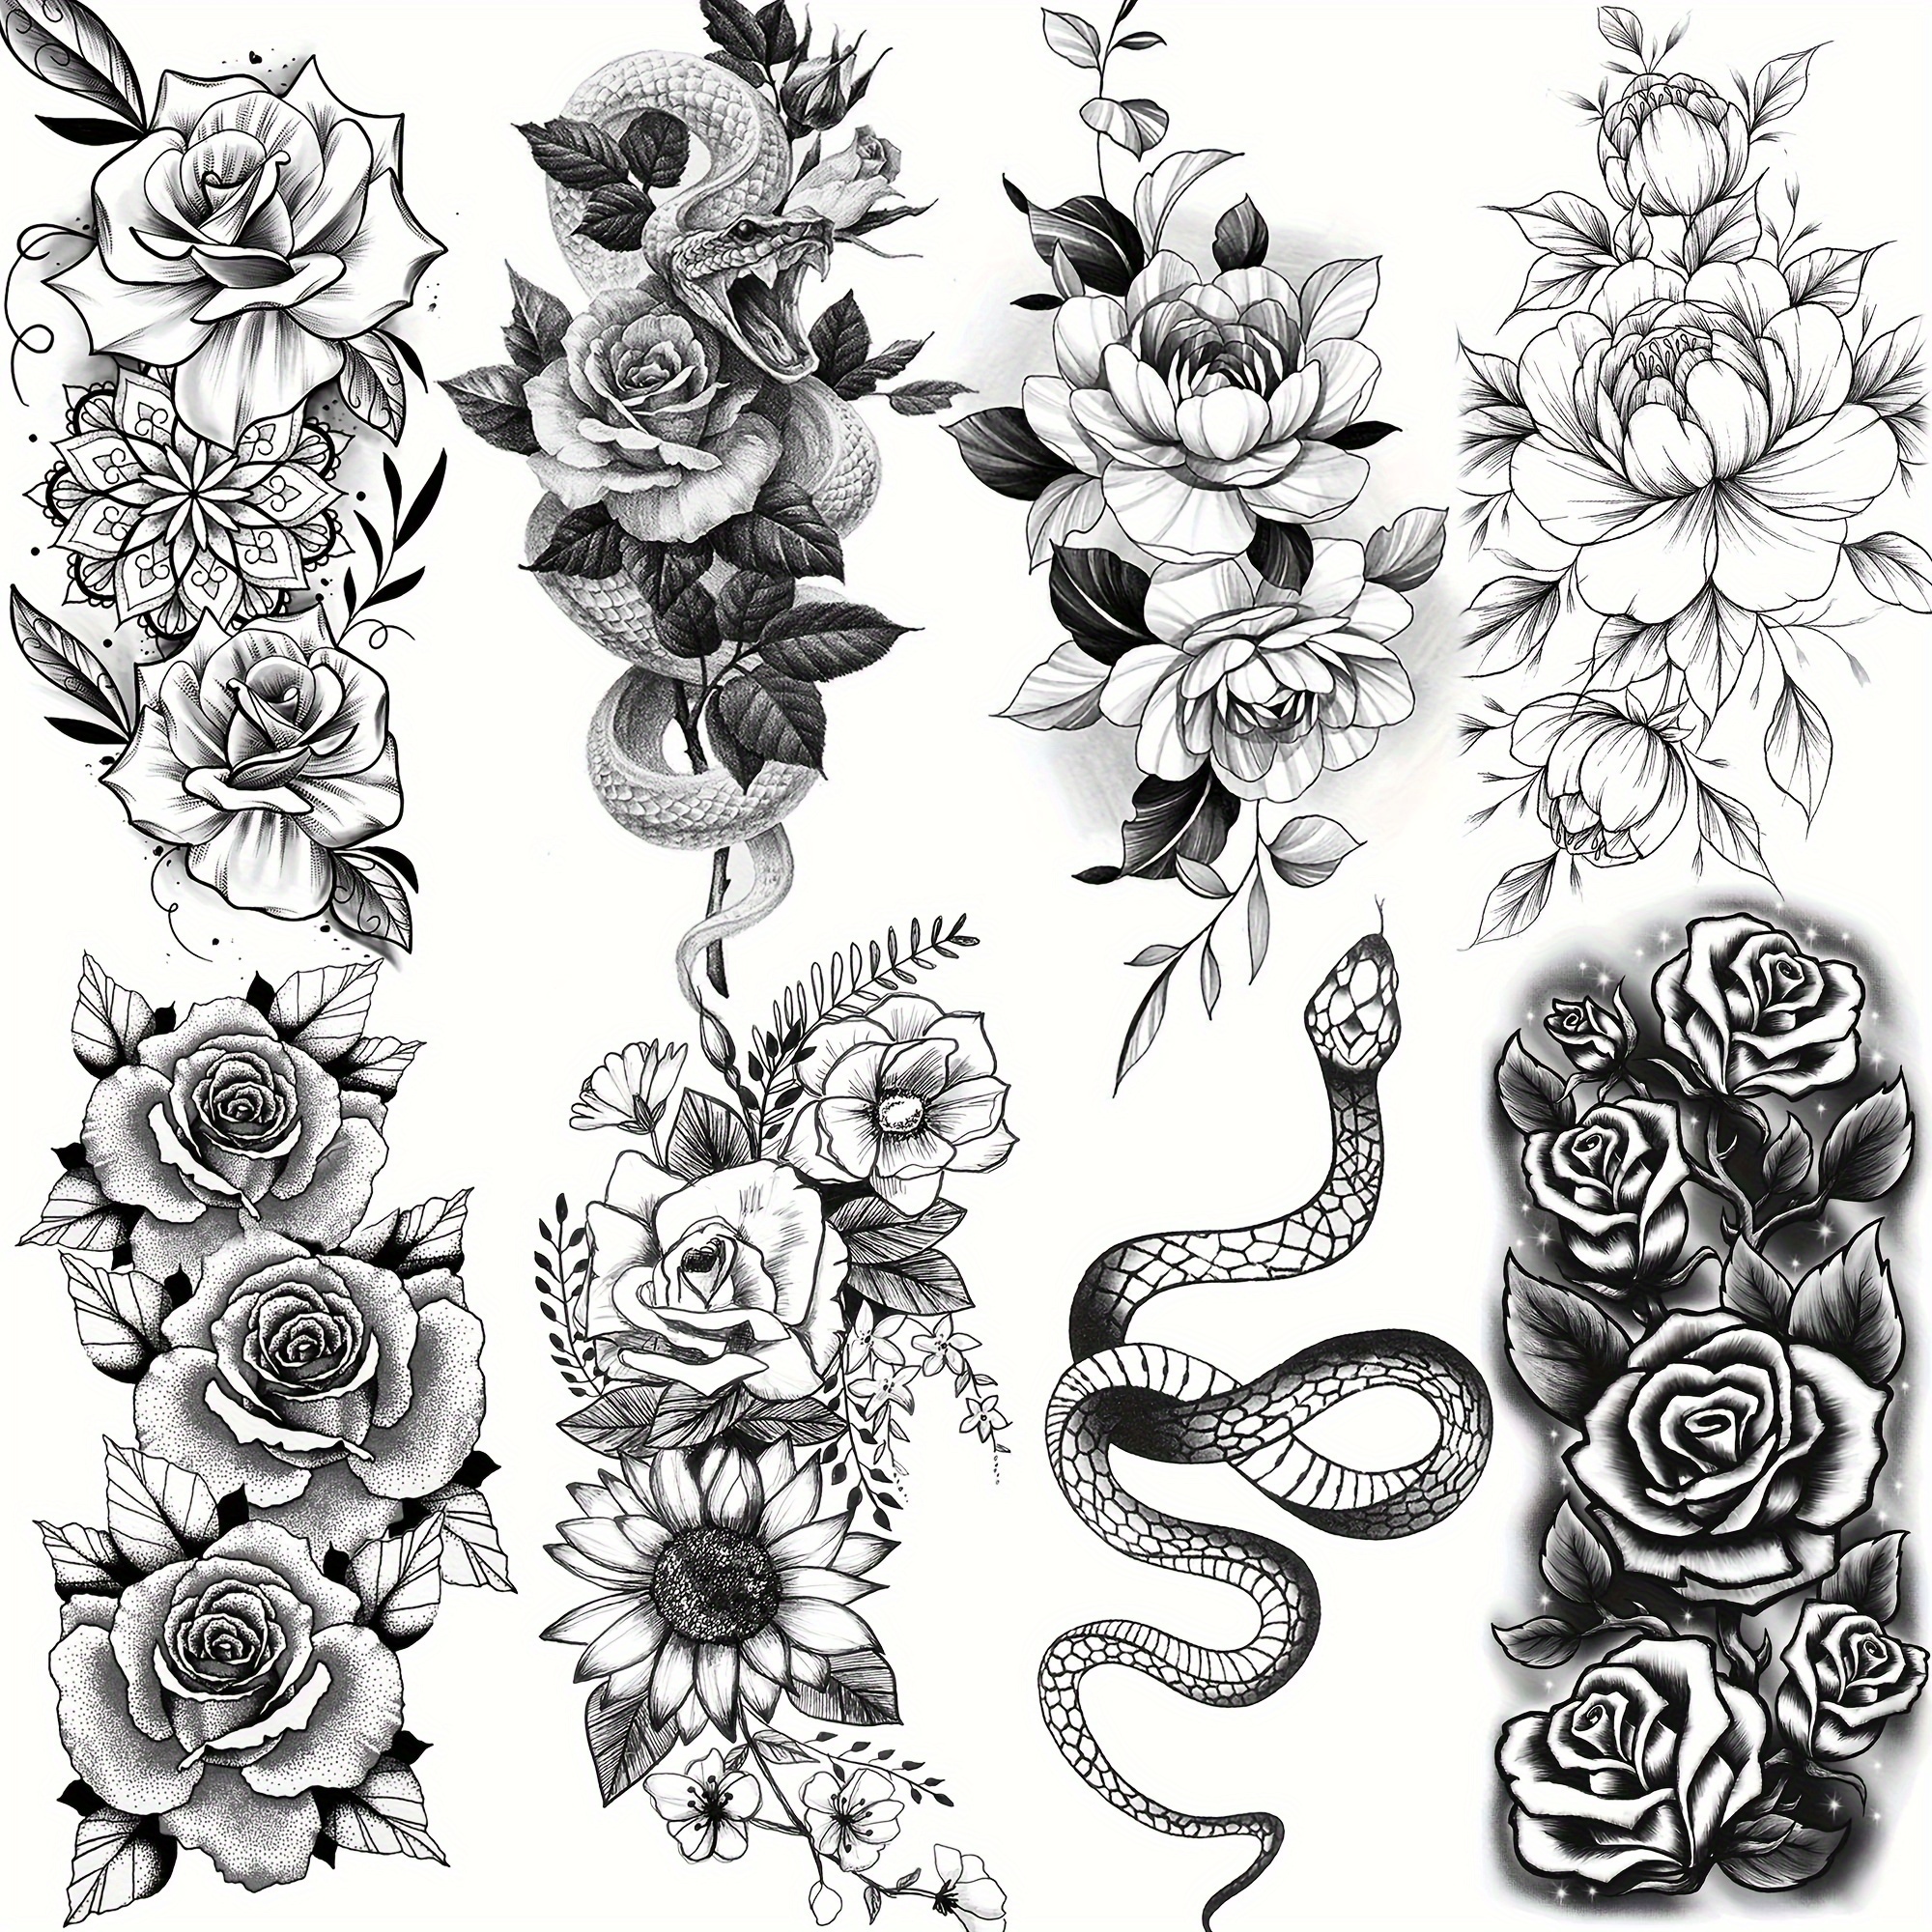 

8-piece Realistic Peony & Rose Temporary Tattoos - Waterproof Body Art Stickers For Arms, Legs | Ideal For Men, Women & Teens